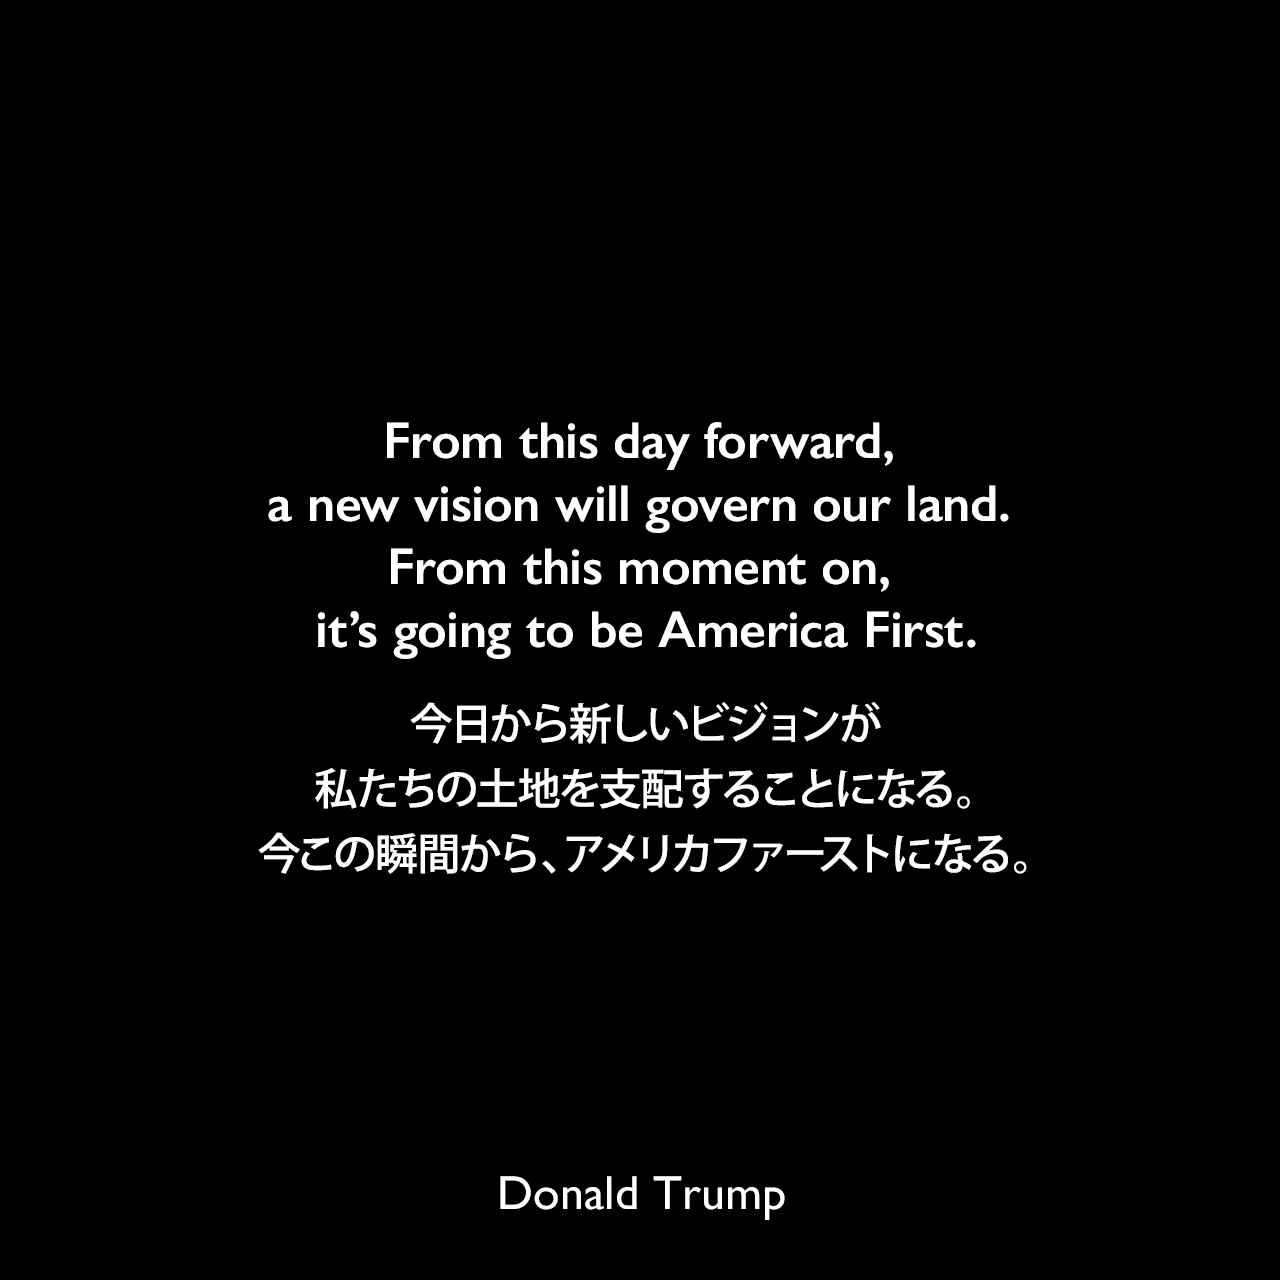 From this day forward, a new vision will govern our land. From this moment on, it’s going to be America First.今日から新しいビジョンが私たちの土地を支配することになる。今この瞬間から、アメリカファーストになる。- 2017年の大統領就任演説よりDonald Trump